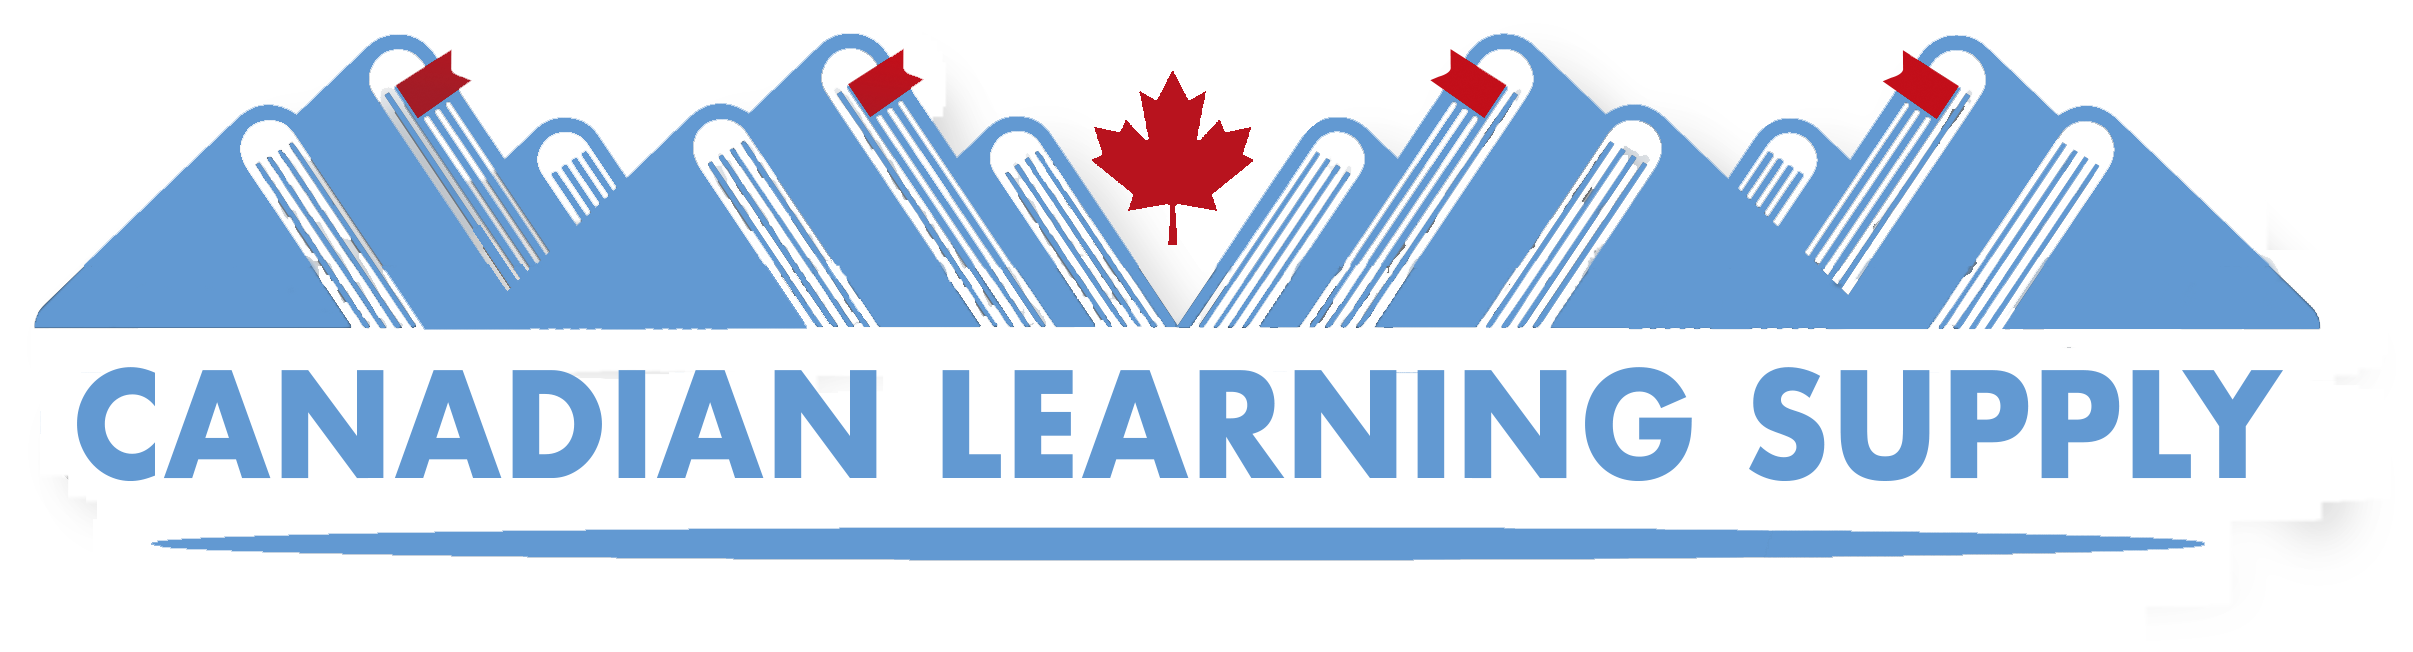 Canadian Learning Supply Inc. 